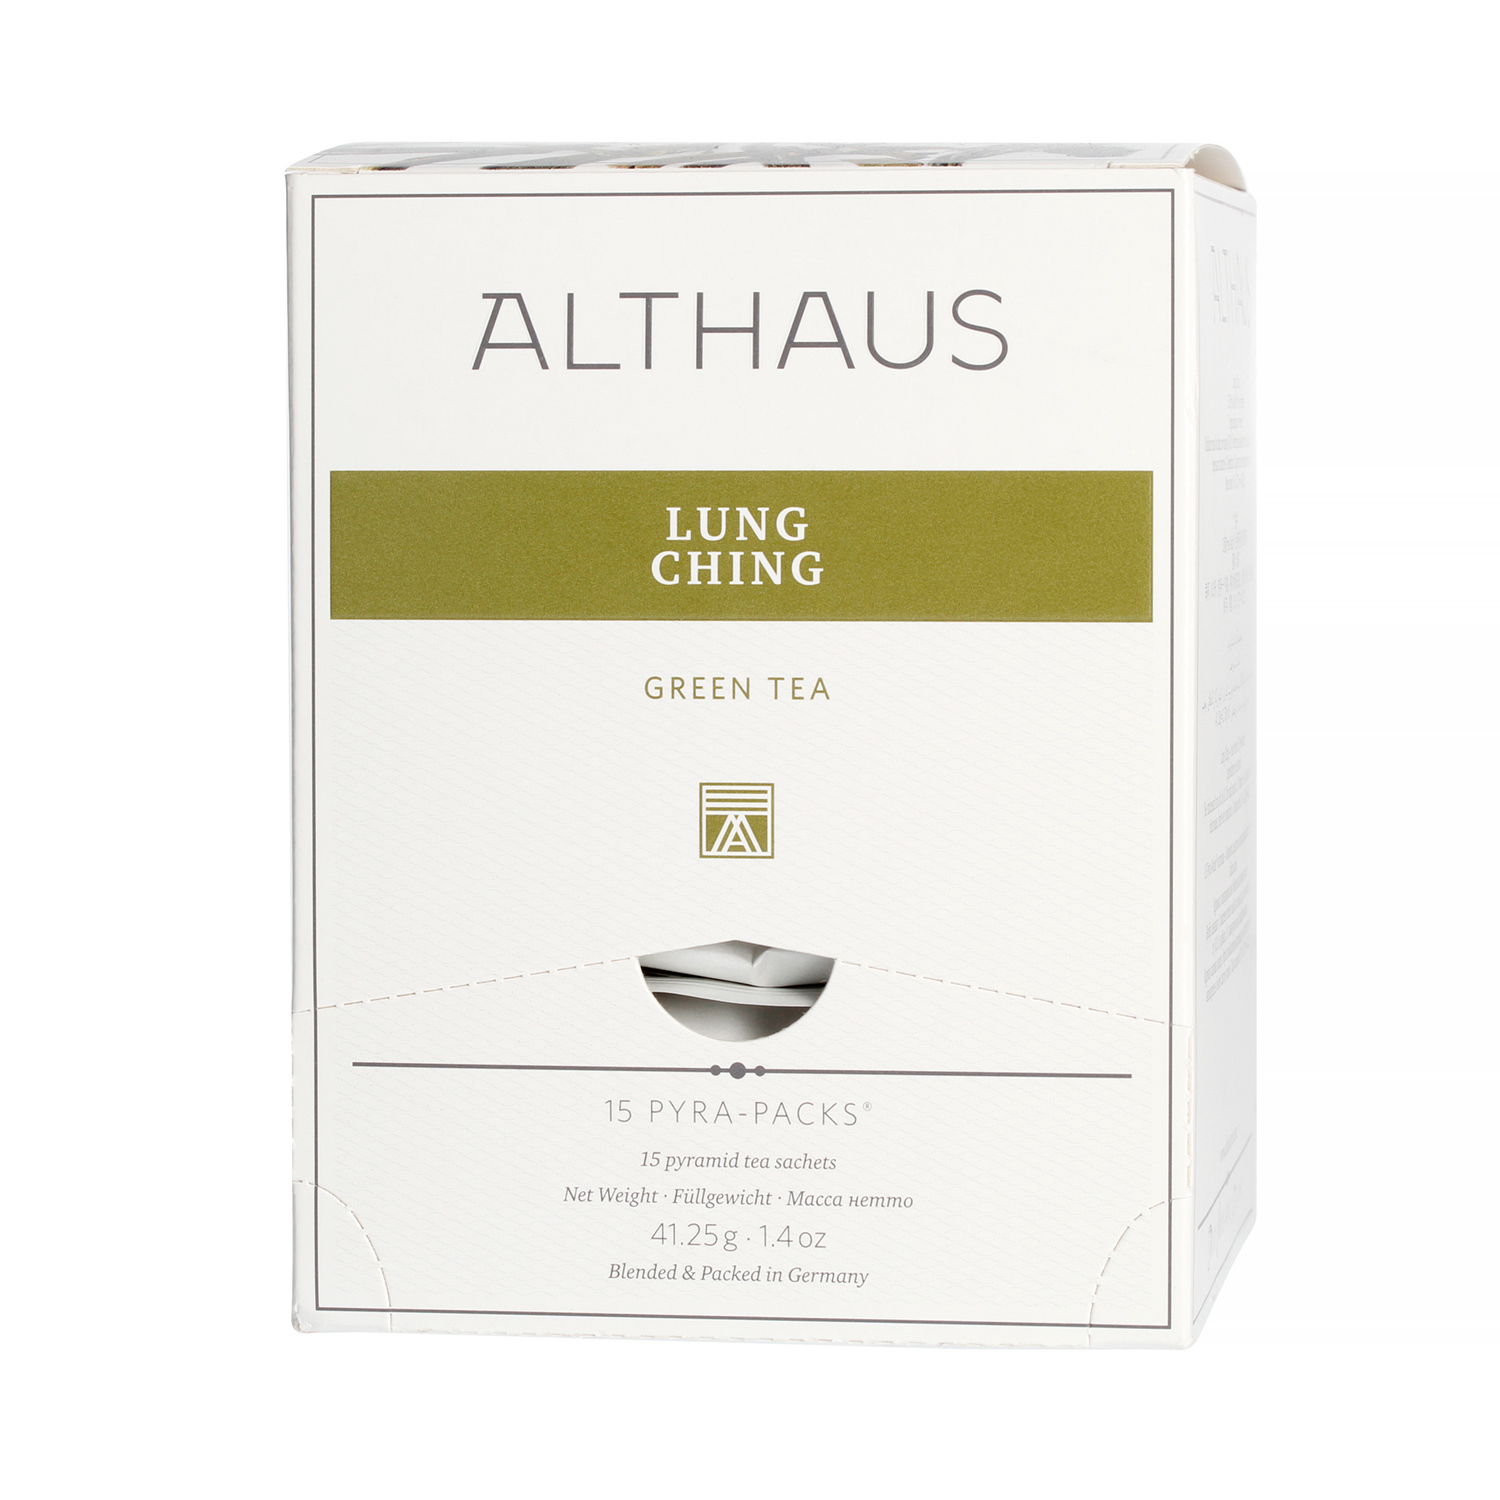 Althaus - Lung Ching Pyra Pack - 15 Tea Pyramids